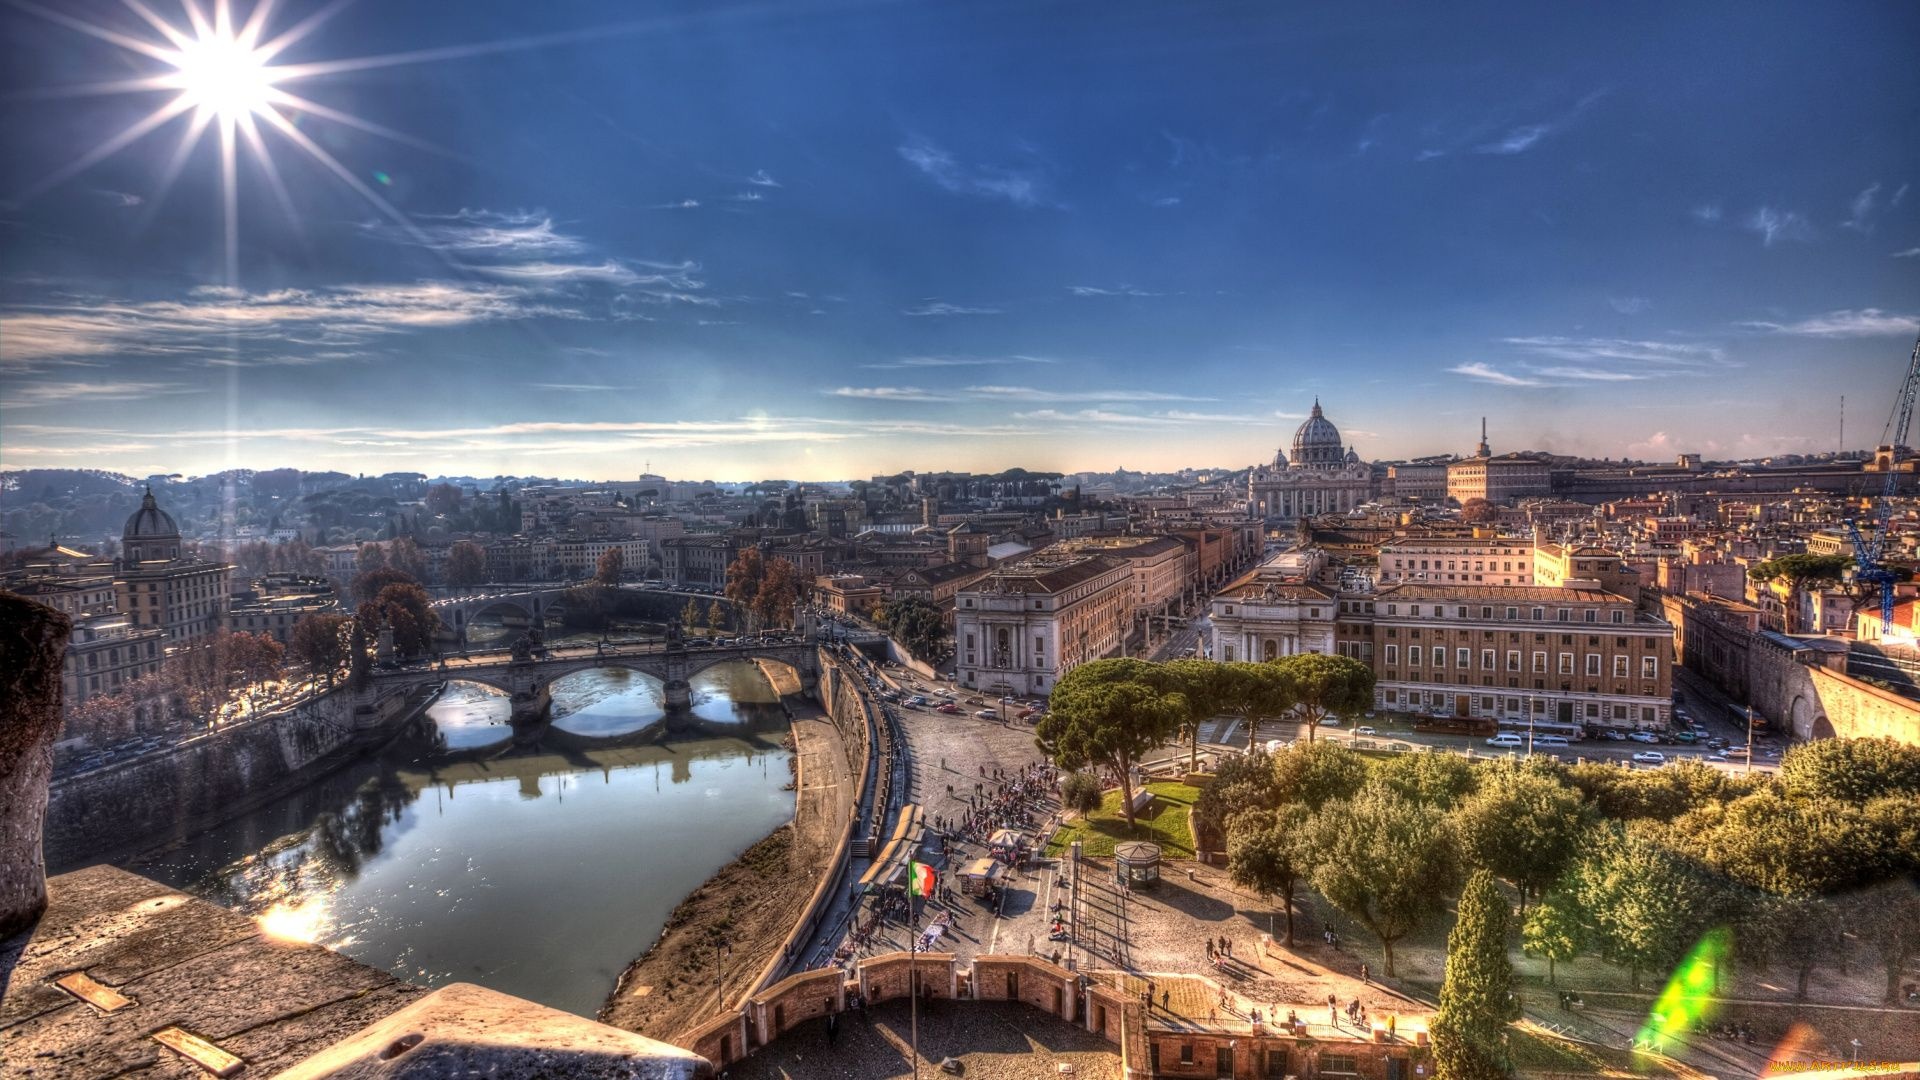 Rome: Capital of Italy since 1870 and the seat of public administration, An important cultural and economic center. 1920x1080 Full HD Wallpaper.